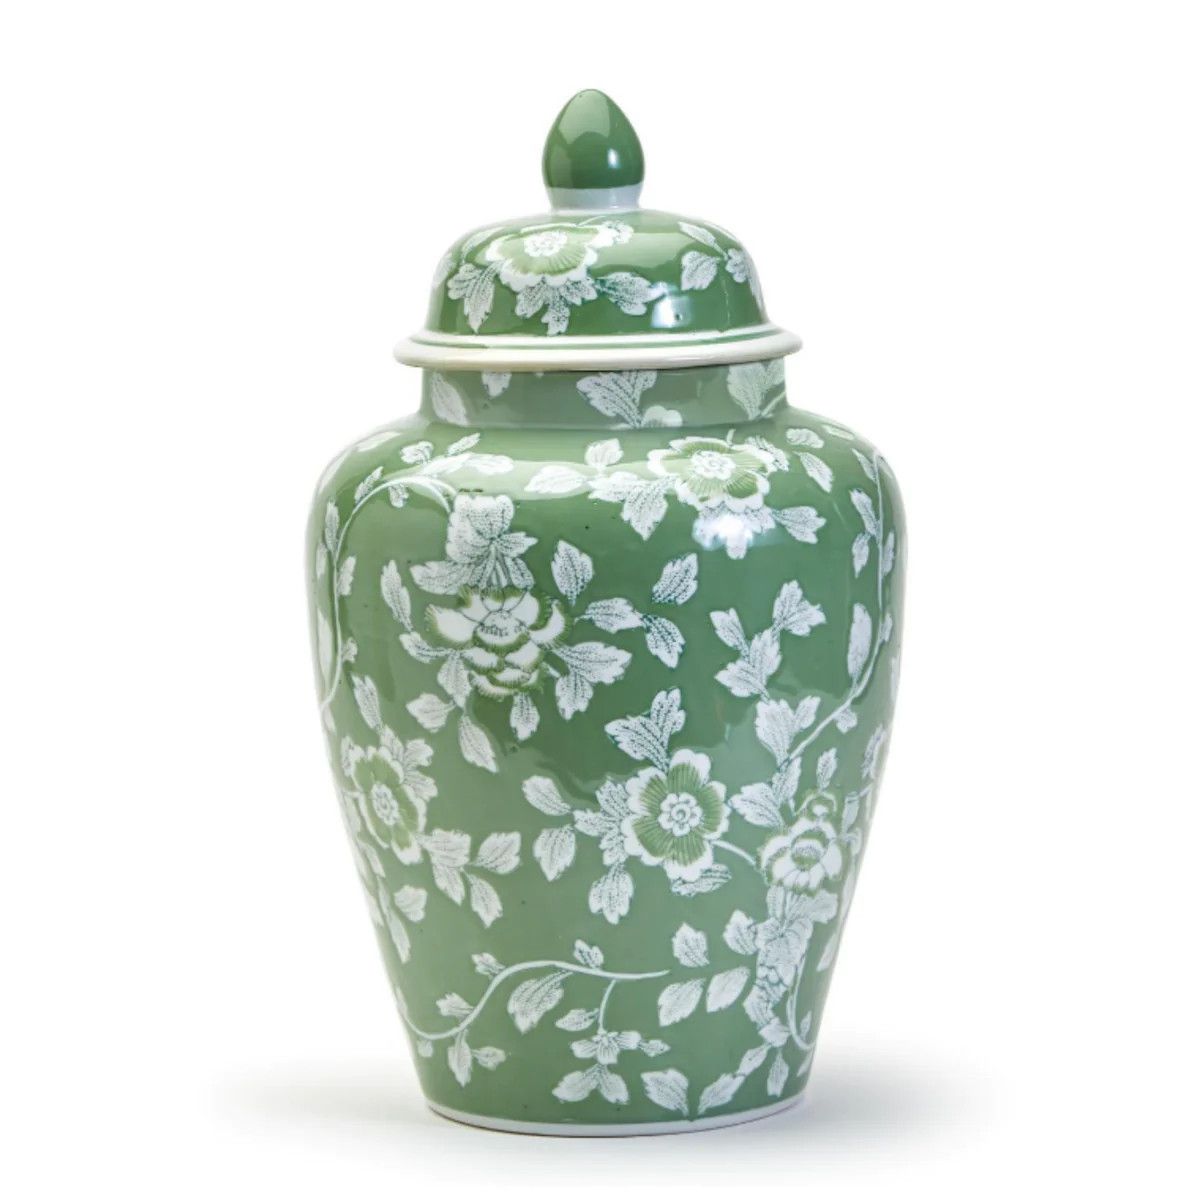 Porcelain Green & White Floral Countryside Hand-Painted Ginger Jar | The Well Appointed House, LLC